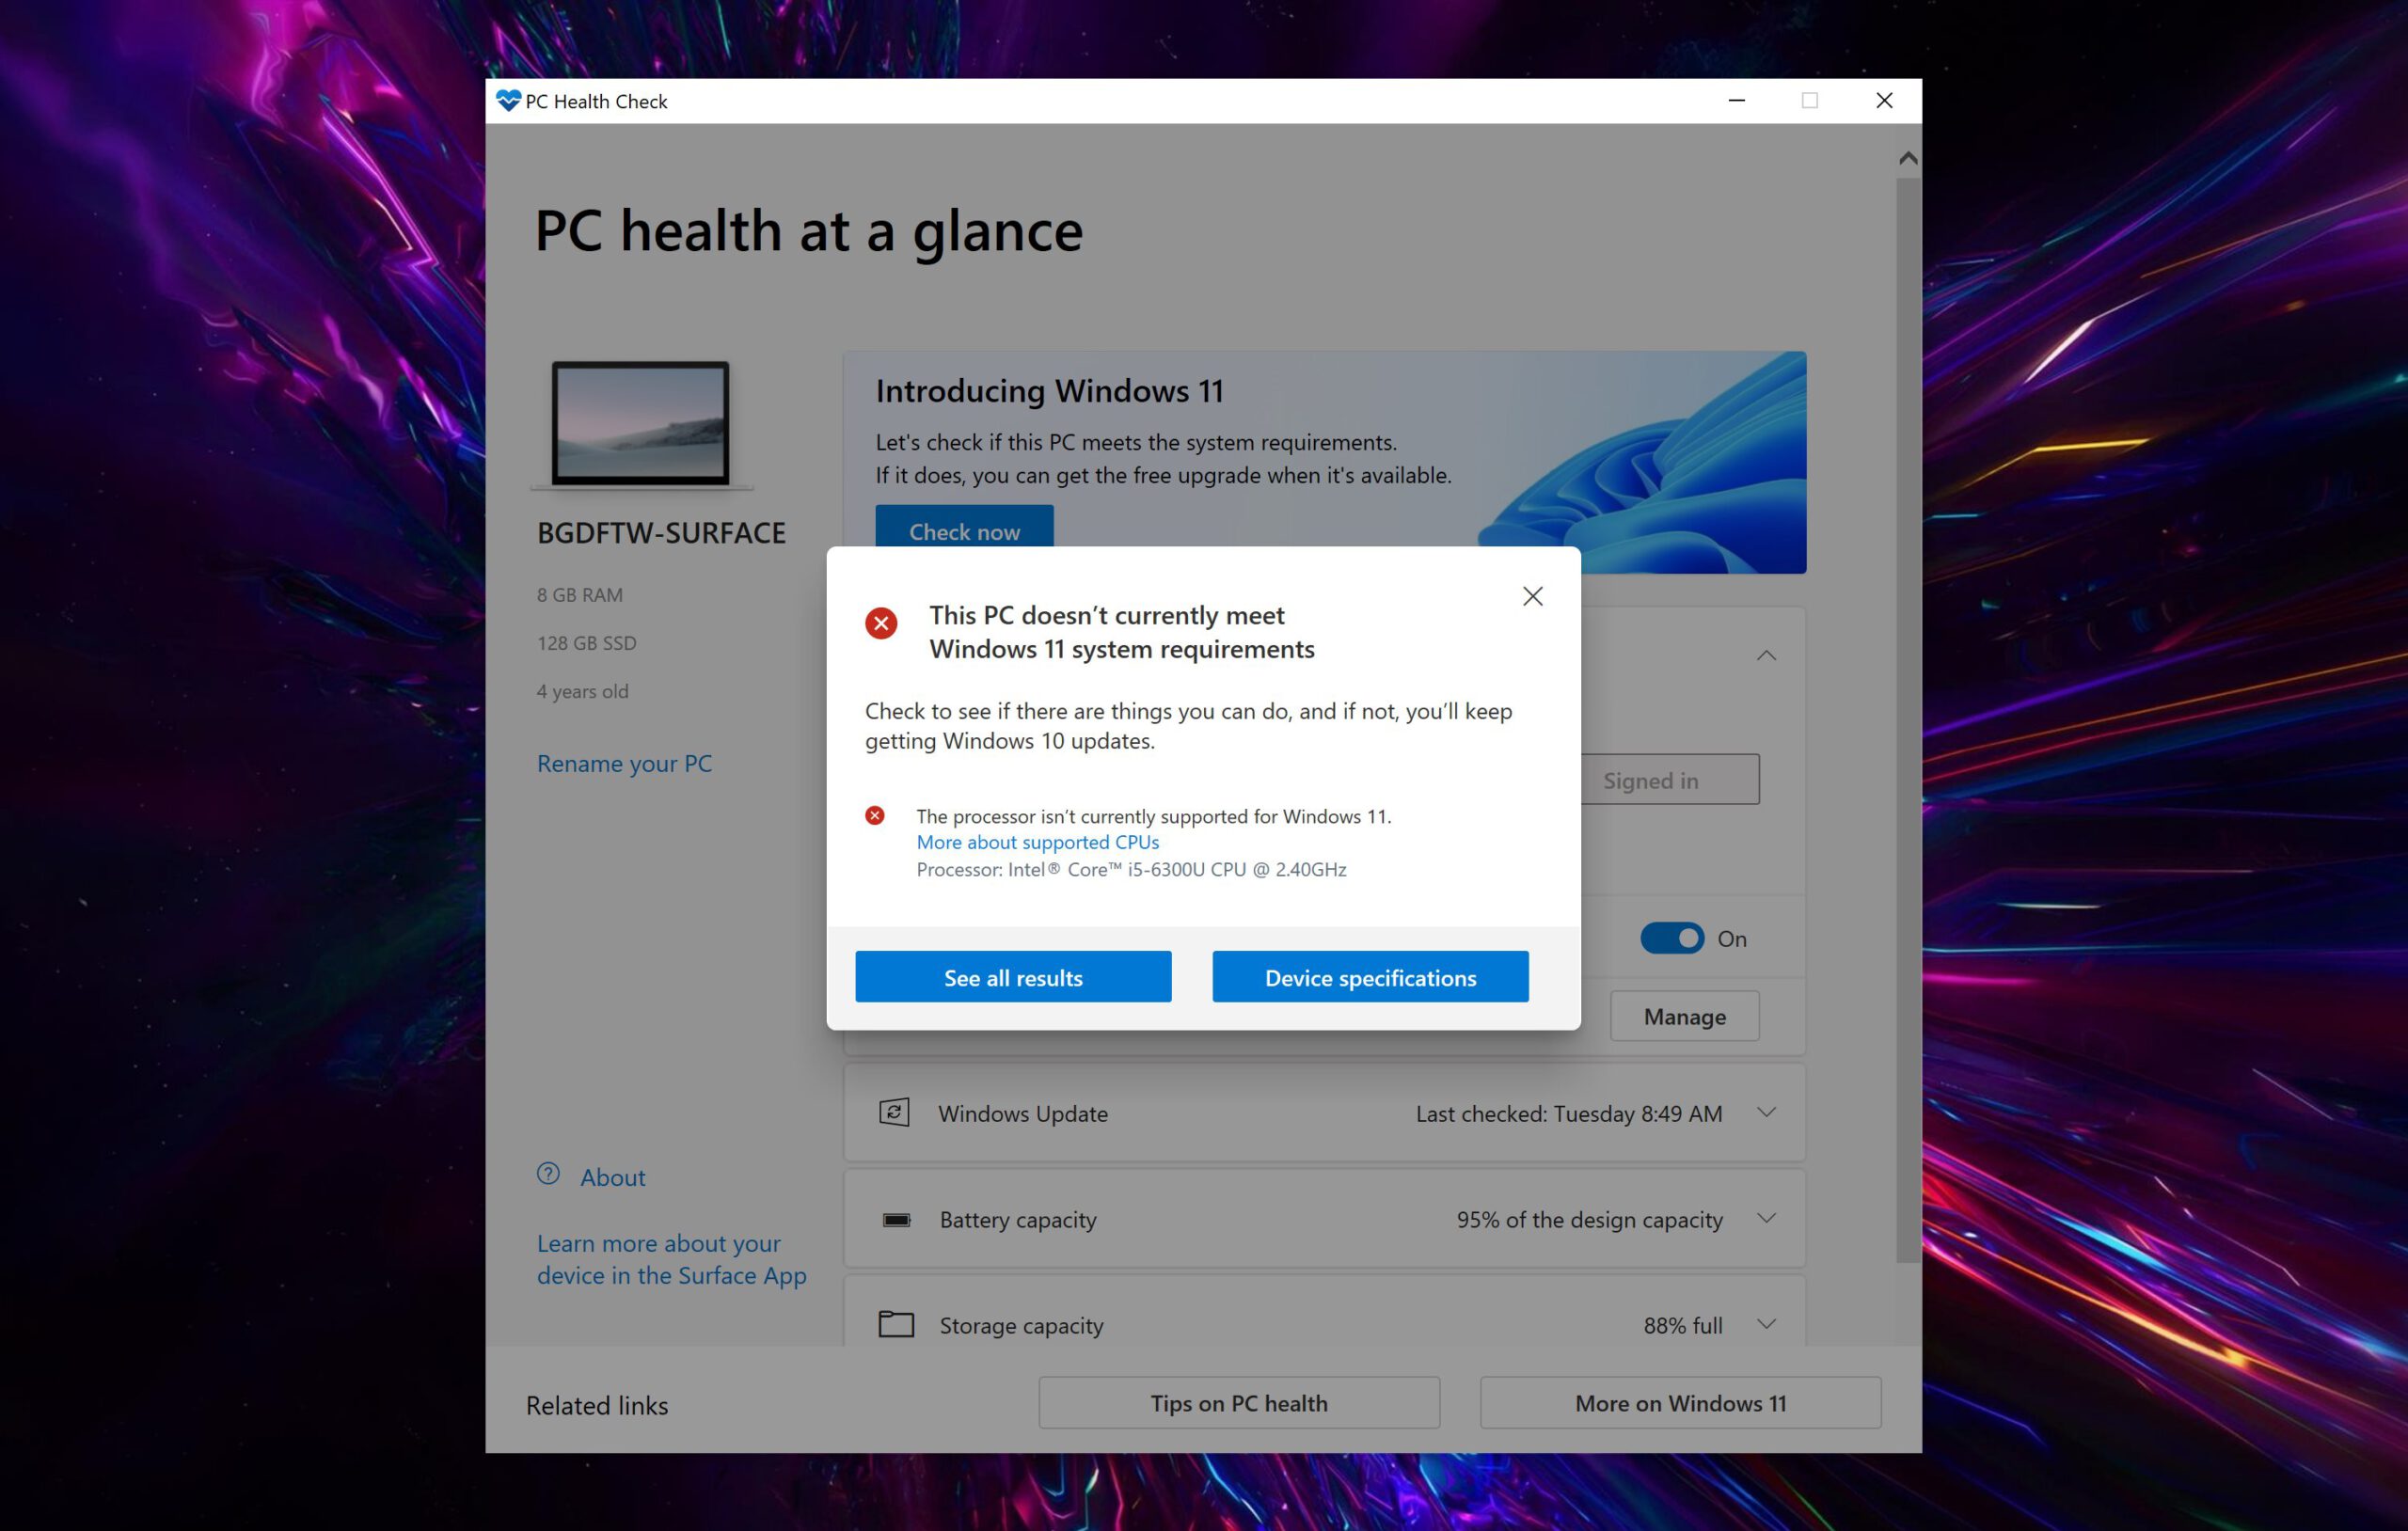 Get Windows 11 Windows 10 Pcs Automatically Offered Pc Health Check